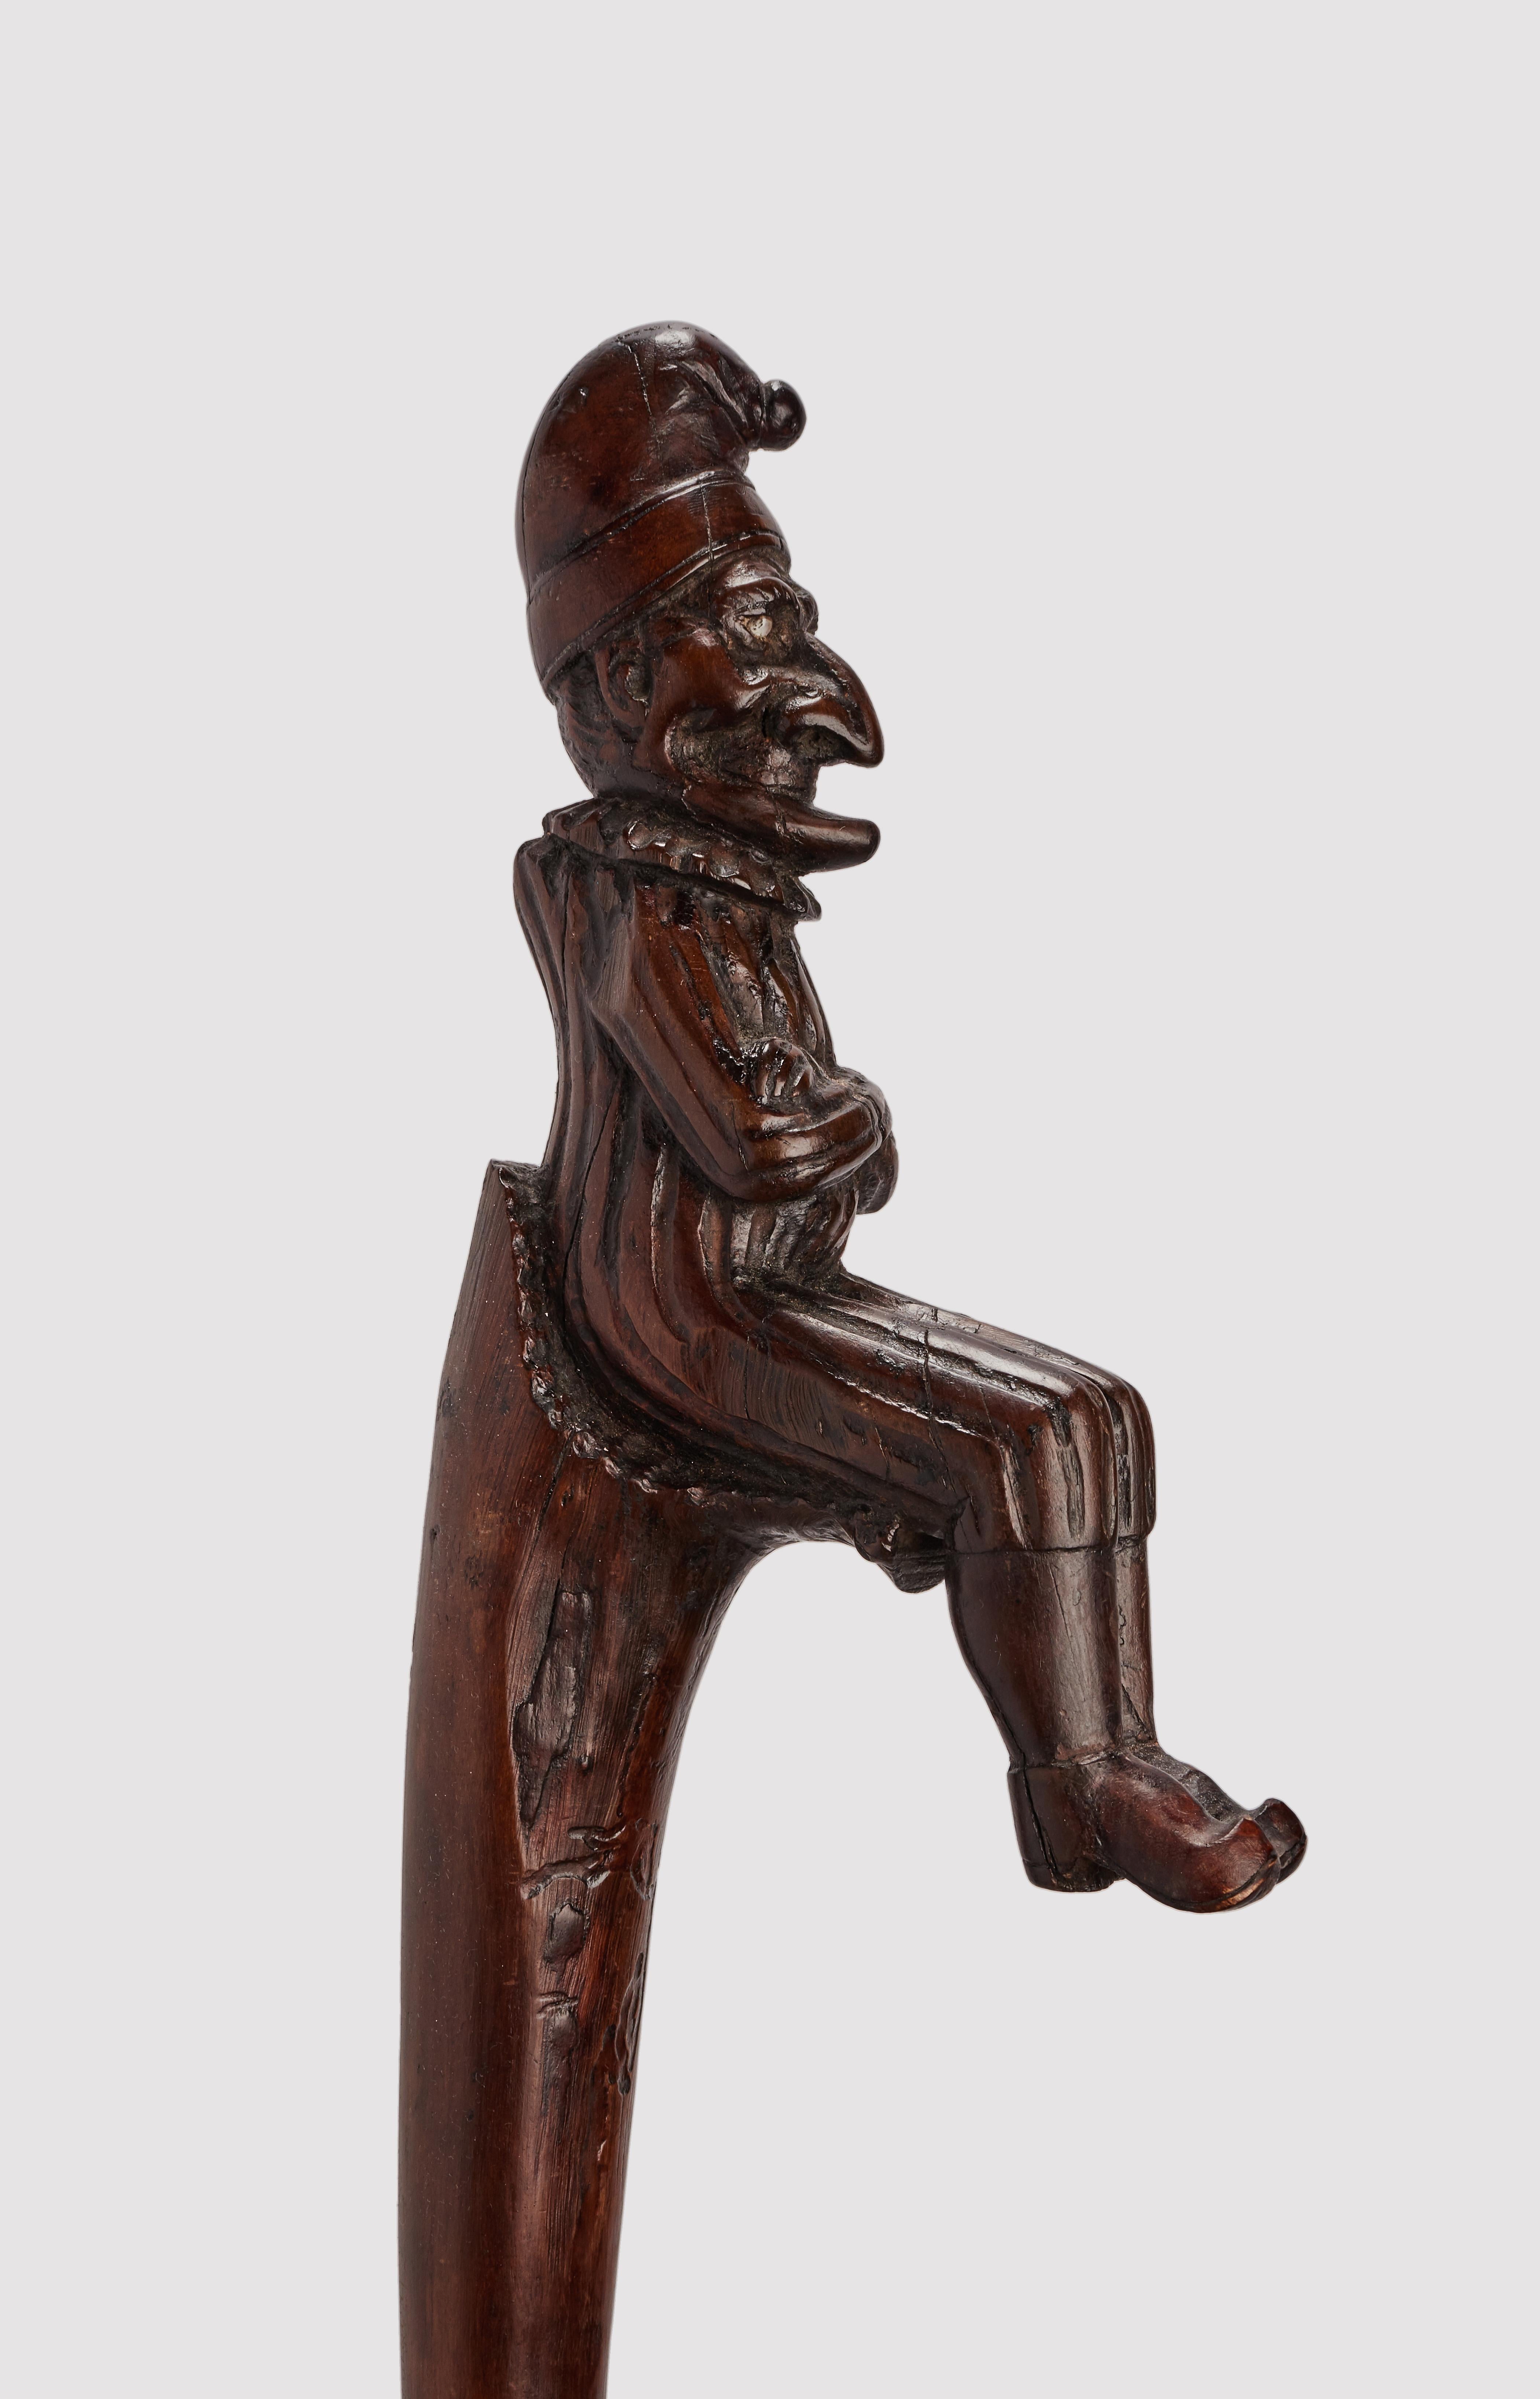 English Folk art walking stick carved and sculpted in walnut wood. The stem is smooth and opens to emulate a seat. On this sits Mr. Punch, rich in detail, with shoes, socks, vertical striped robe, pleated collar and cap. The hump is emphasized in